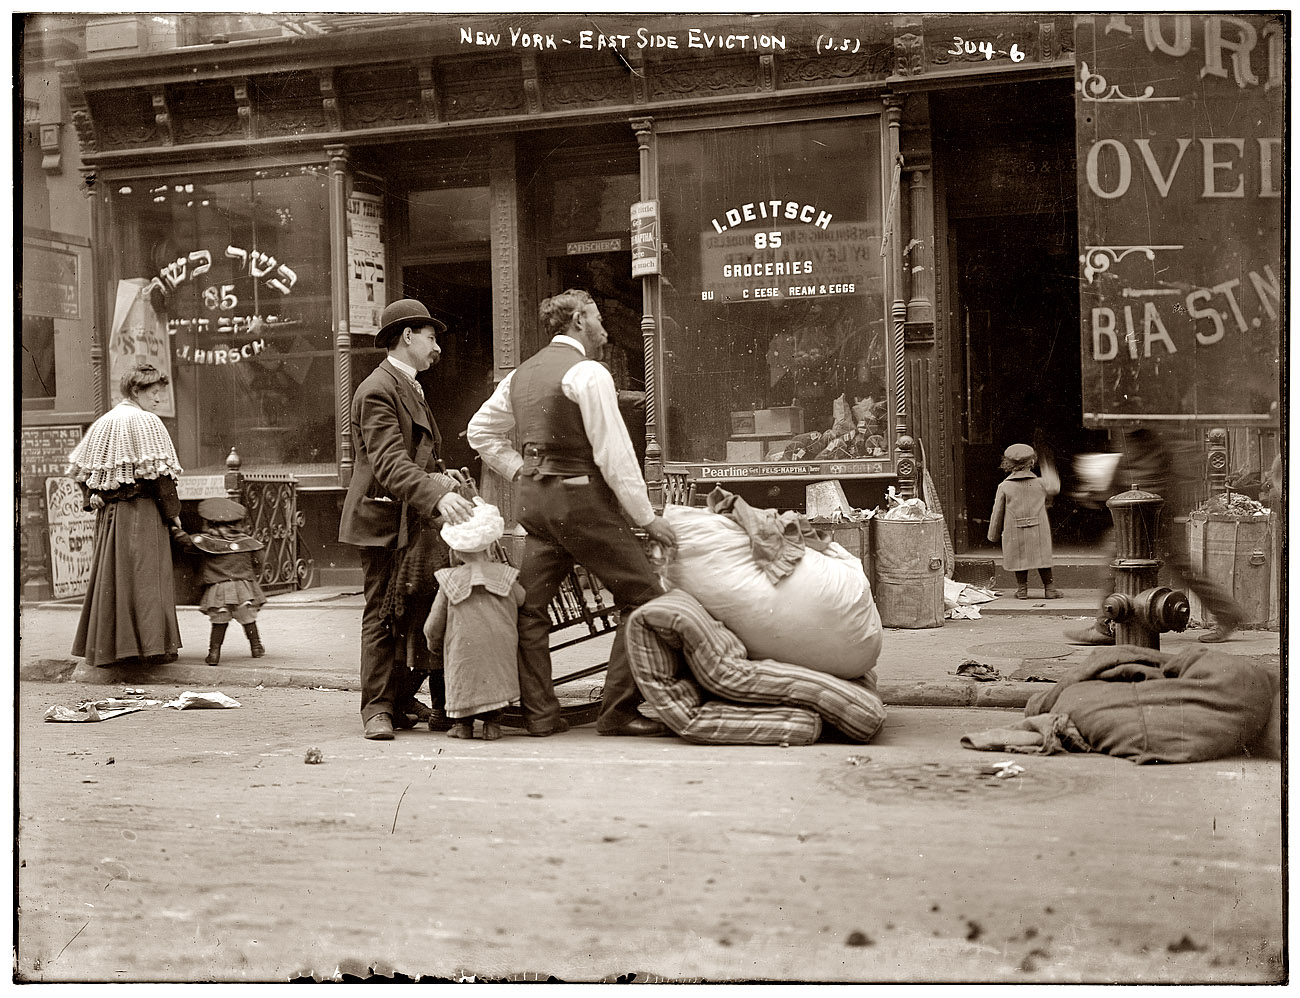 Eviction in an East Side neighborhood of New York circa 1908. View full size. 8x10 glass negative, George Grantham Bain Collection.